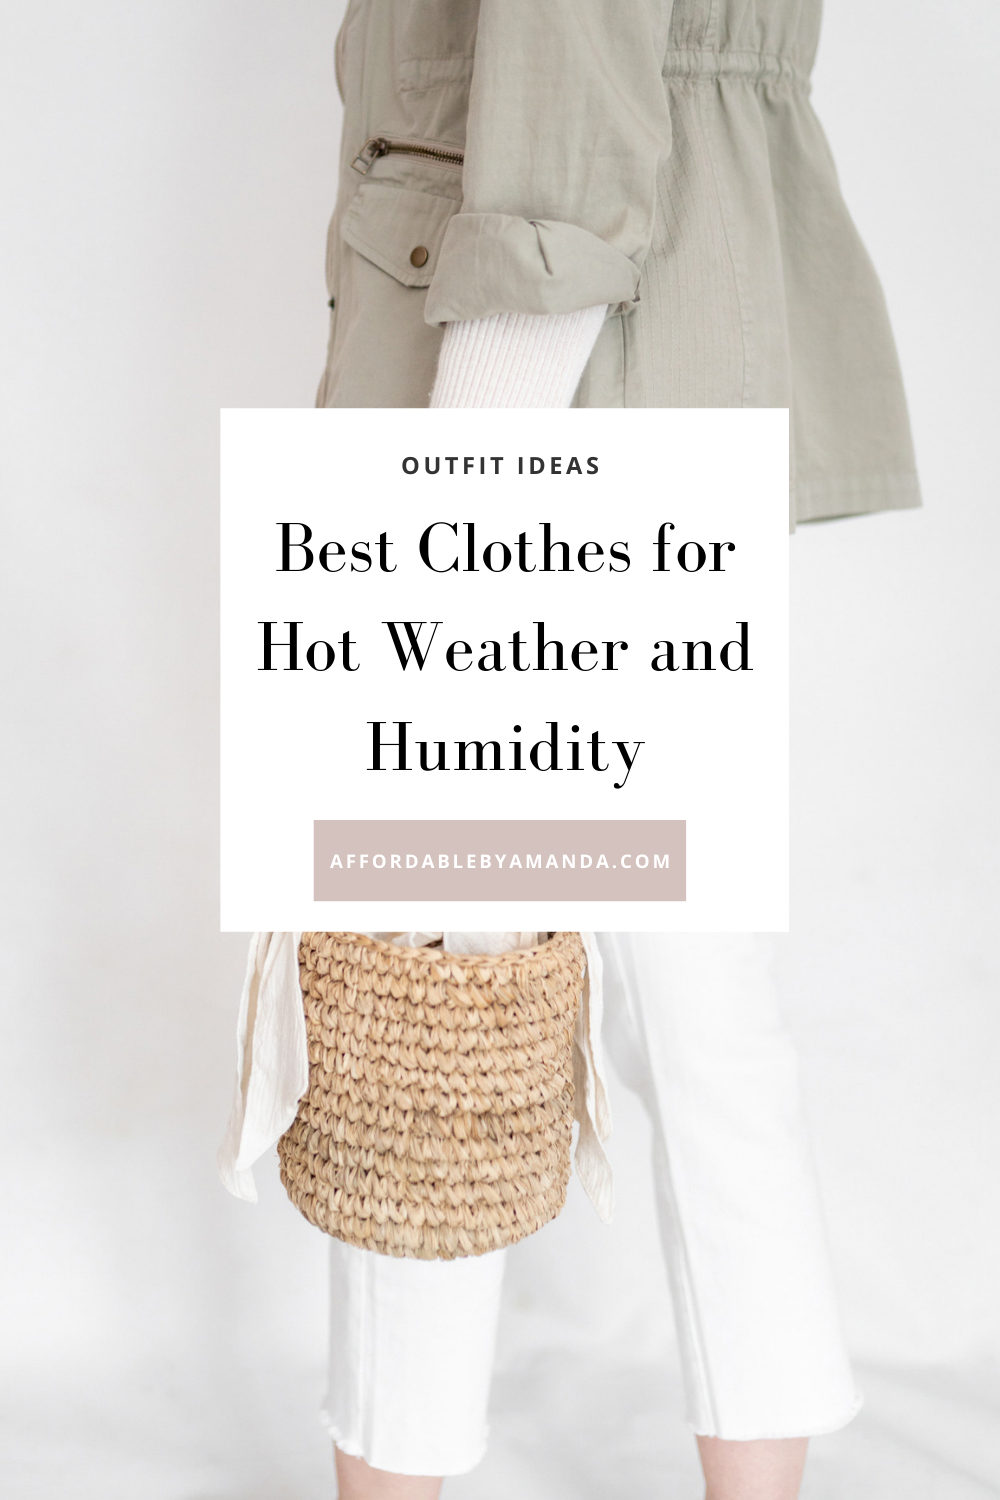 Best Clothes for Hot Weather and Humidity - Affordable by Amanda